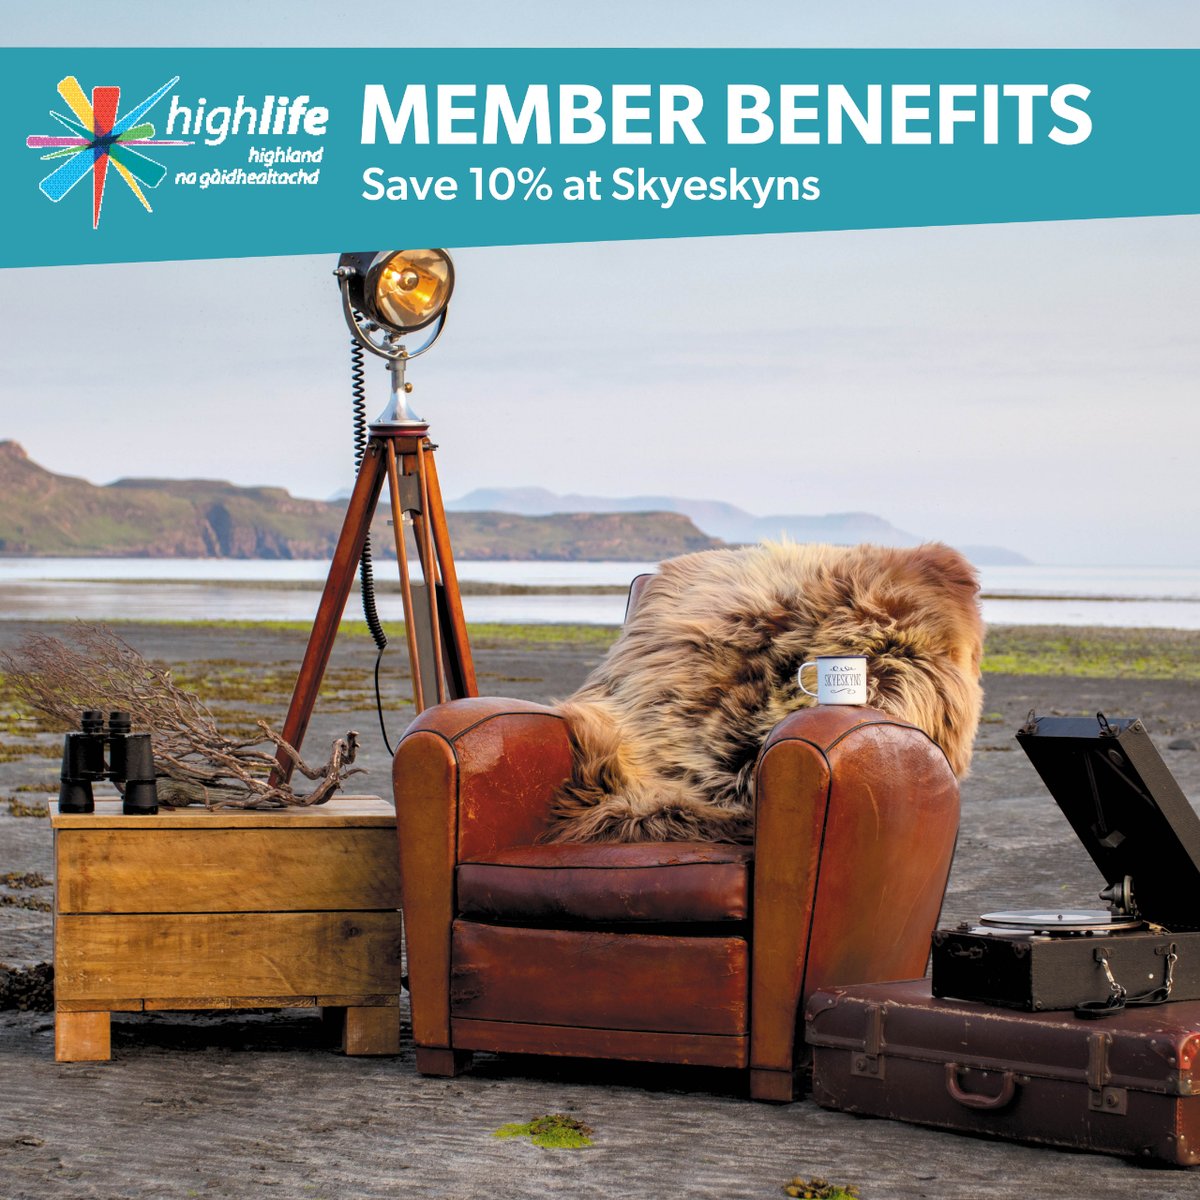 ⭐️ Member Benefits ⭐️ 🐑 Save 10% at Skyeskyns Discover more benefits with High Life Highland: hlh.scot/4466yTB #MemberBenefits #MakingLifeBetter